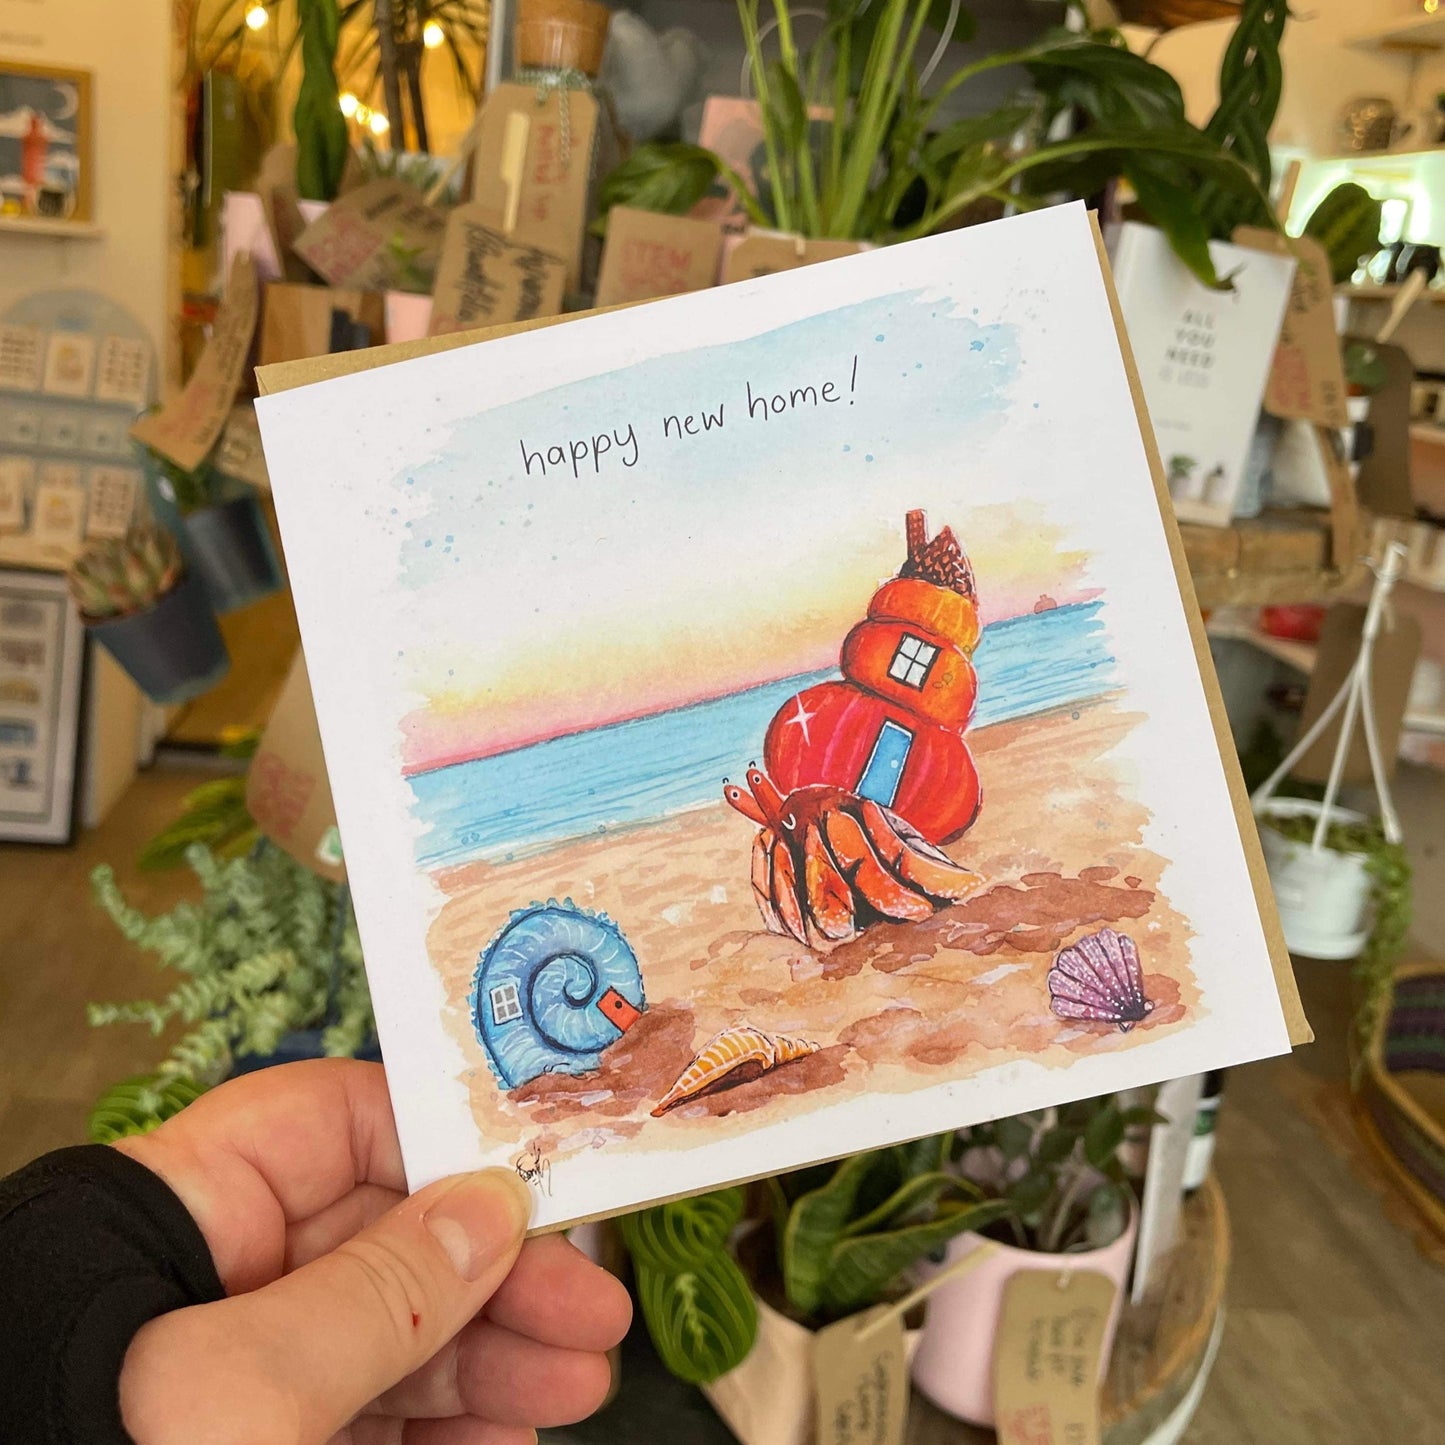 A recycled greetings card designed and painted by Cleethorpes artist, Eve Leoni Smith, featuring a hermit crab and his new shell home on Cleethorpes beach.